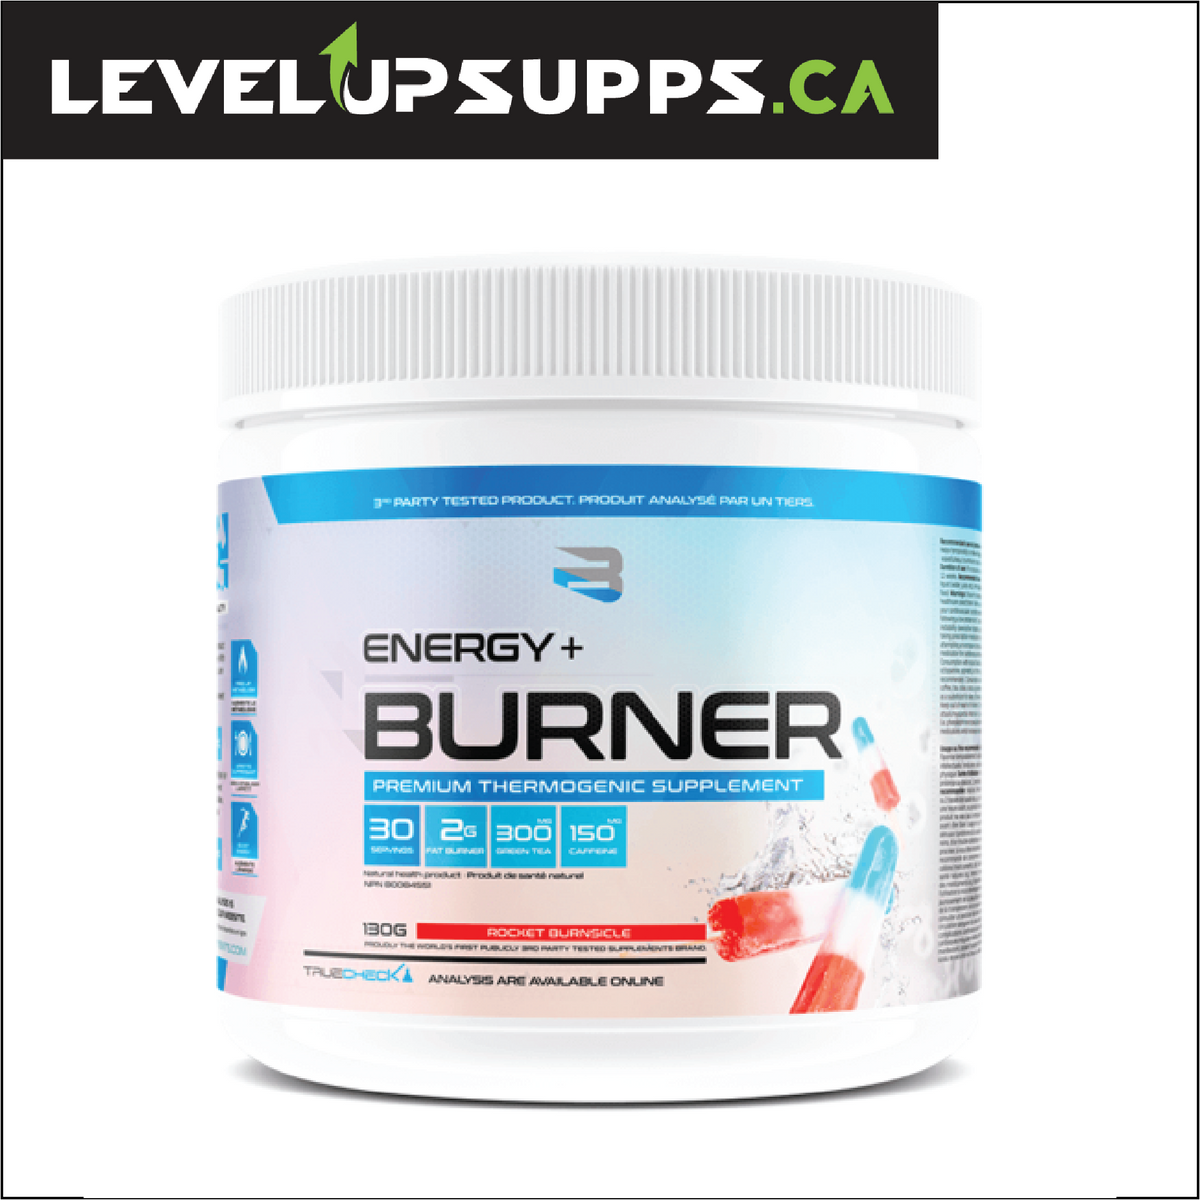 Thermogenic supplements for elevated energy levels